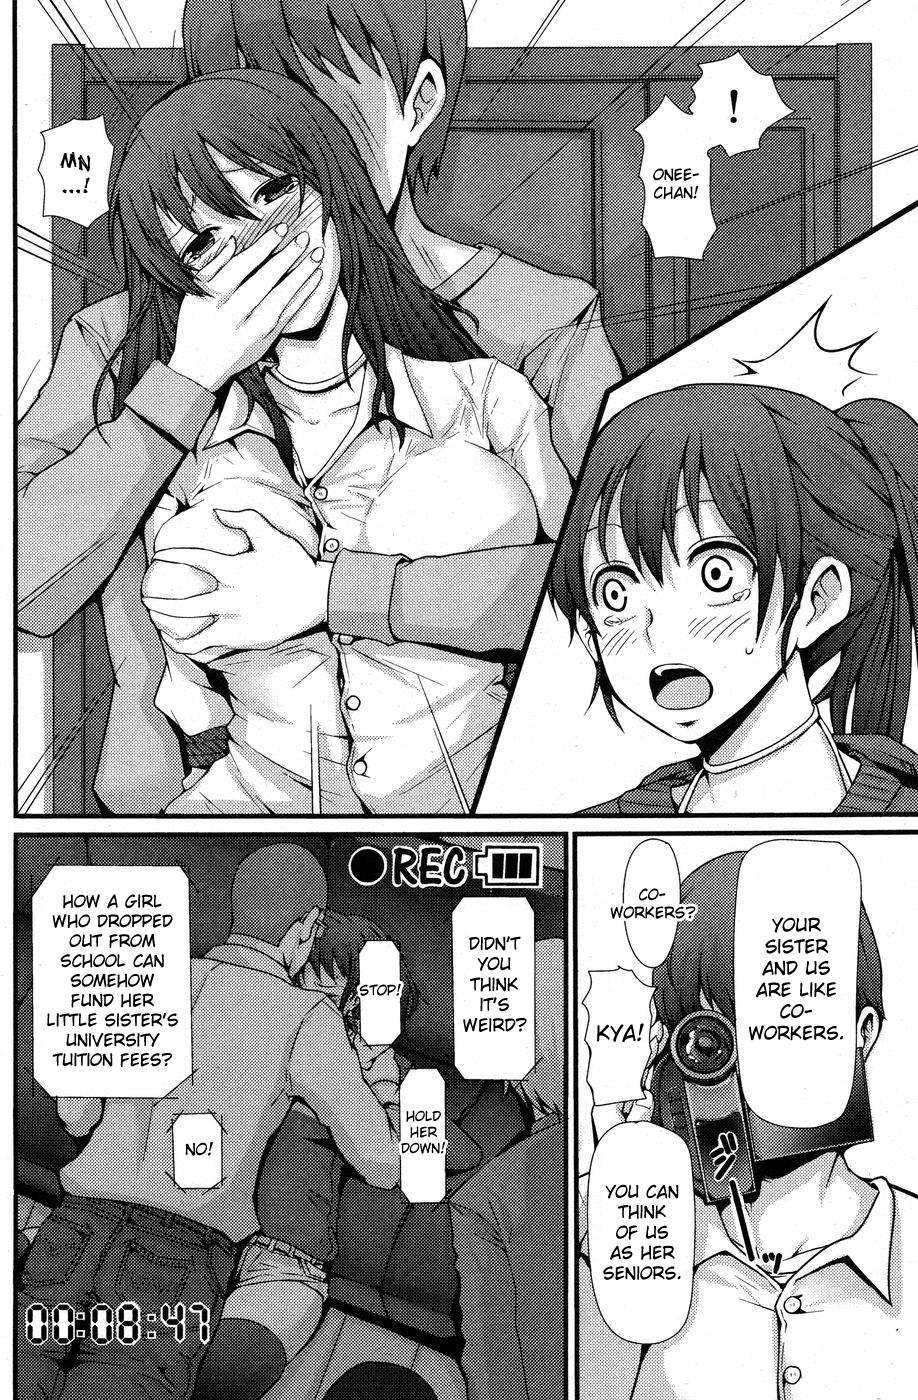 Neighbor REC at ME Tgirls - Page 6